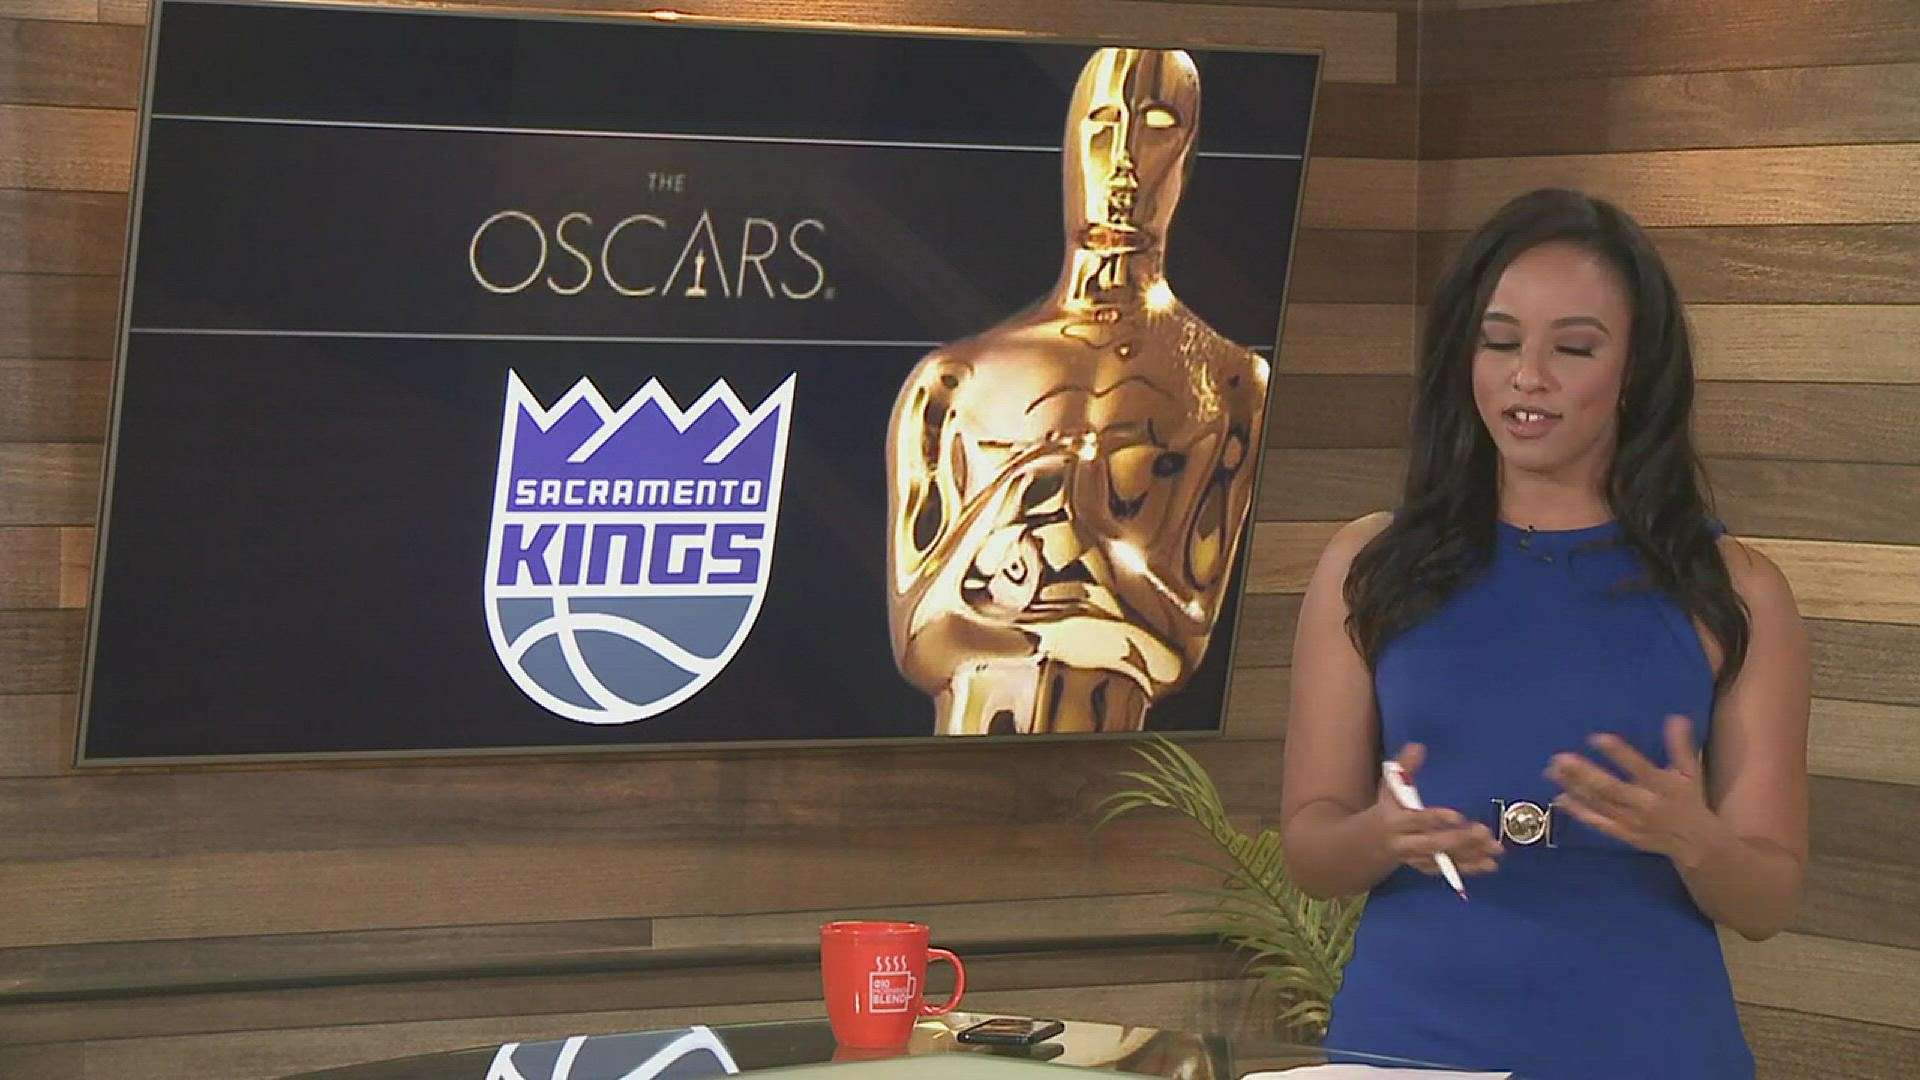 For the third straight year, Kings players tell ABC10 their picks for who wins big on Hollywood's biggest night.